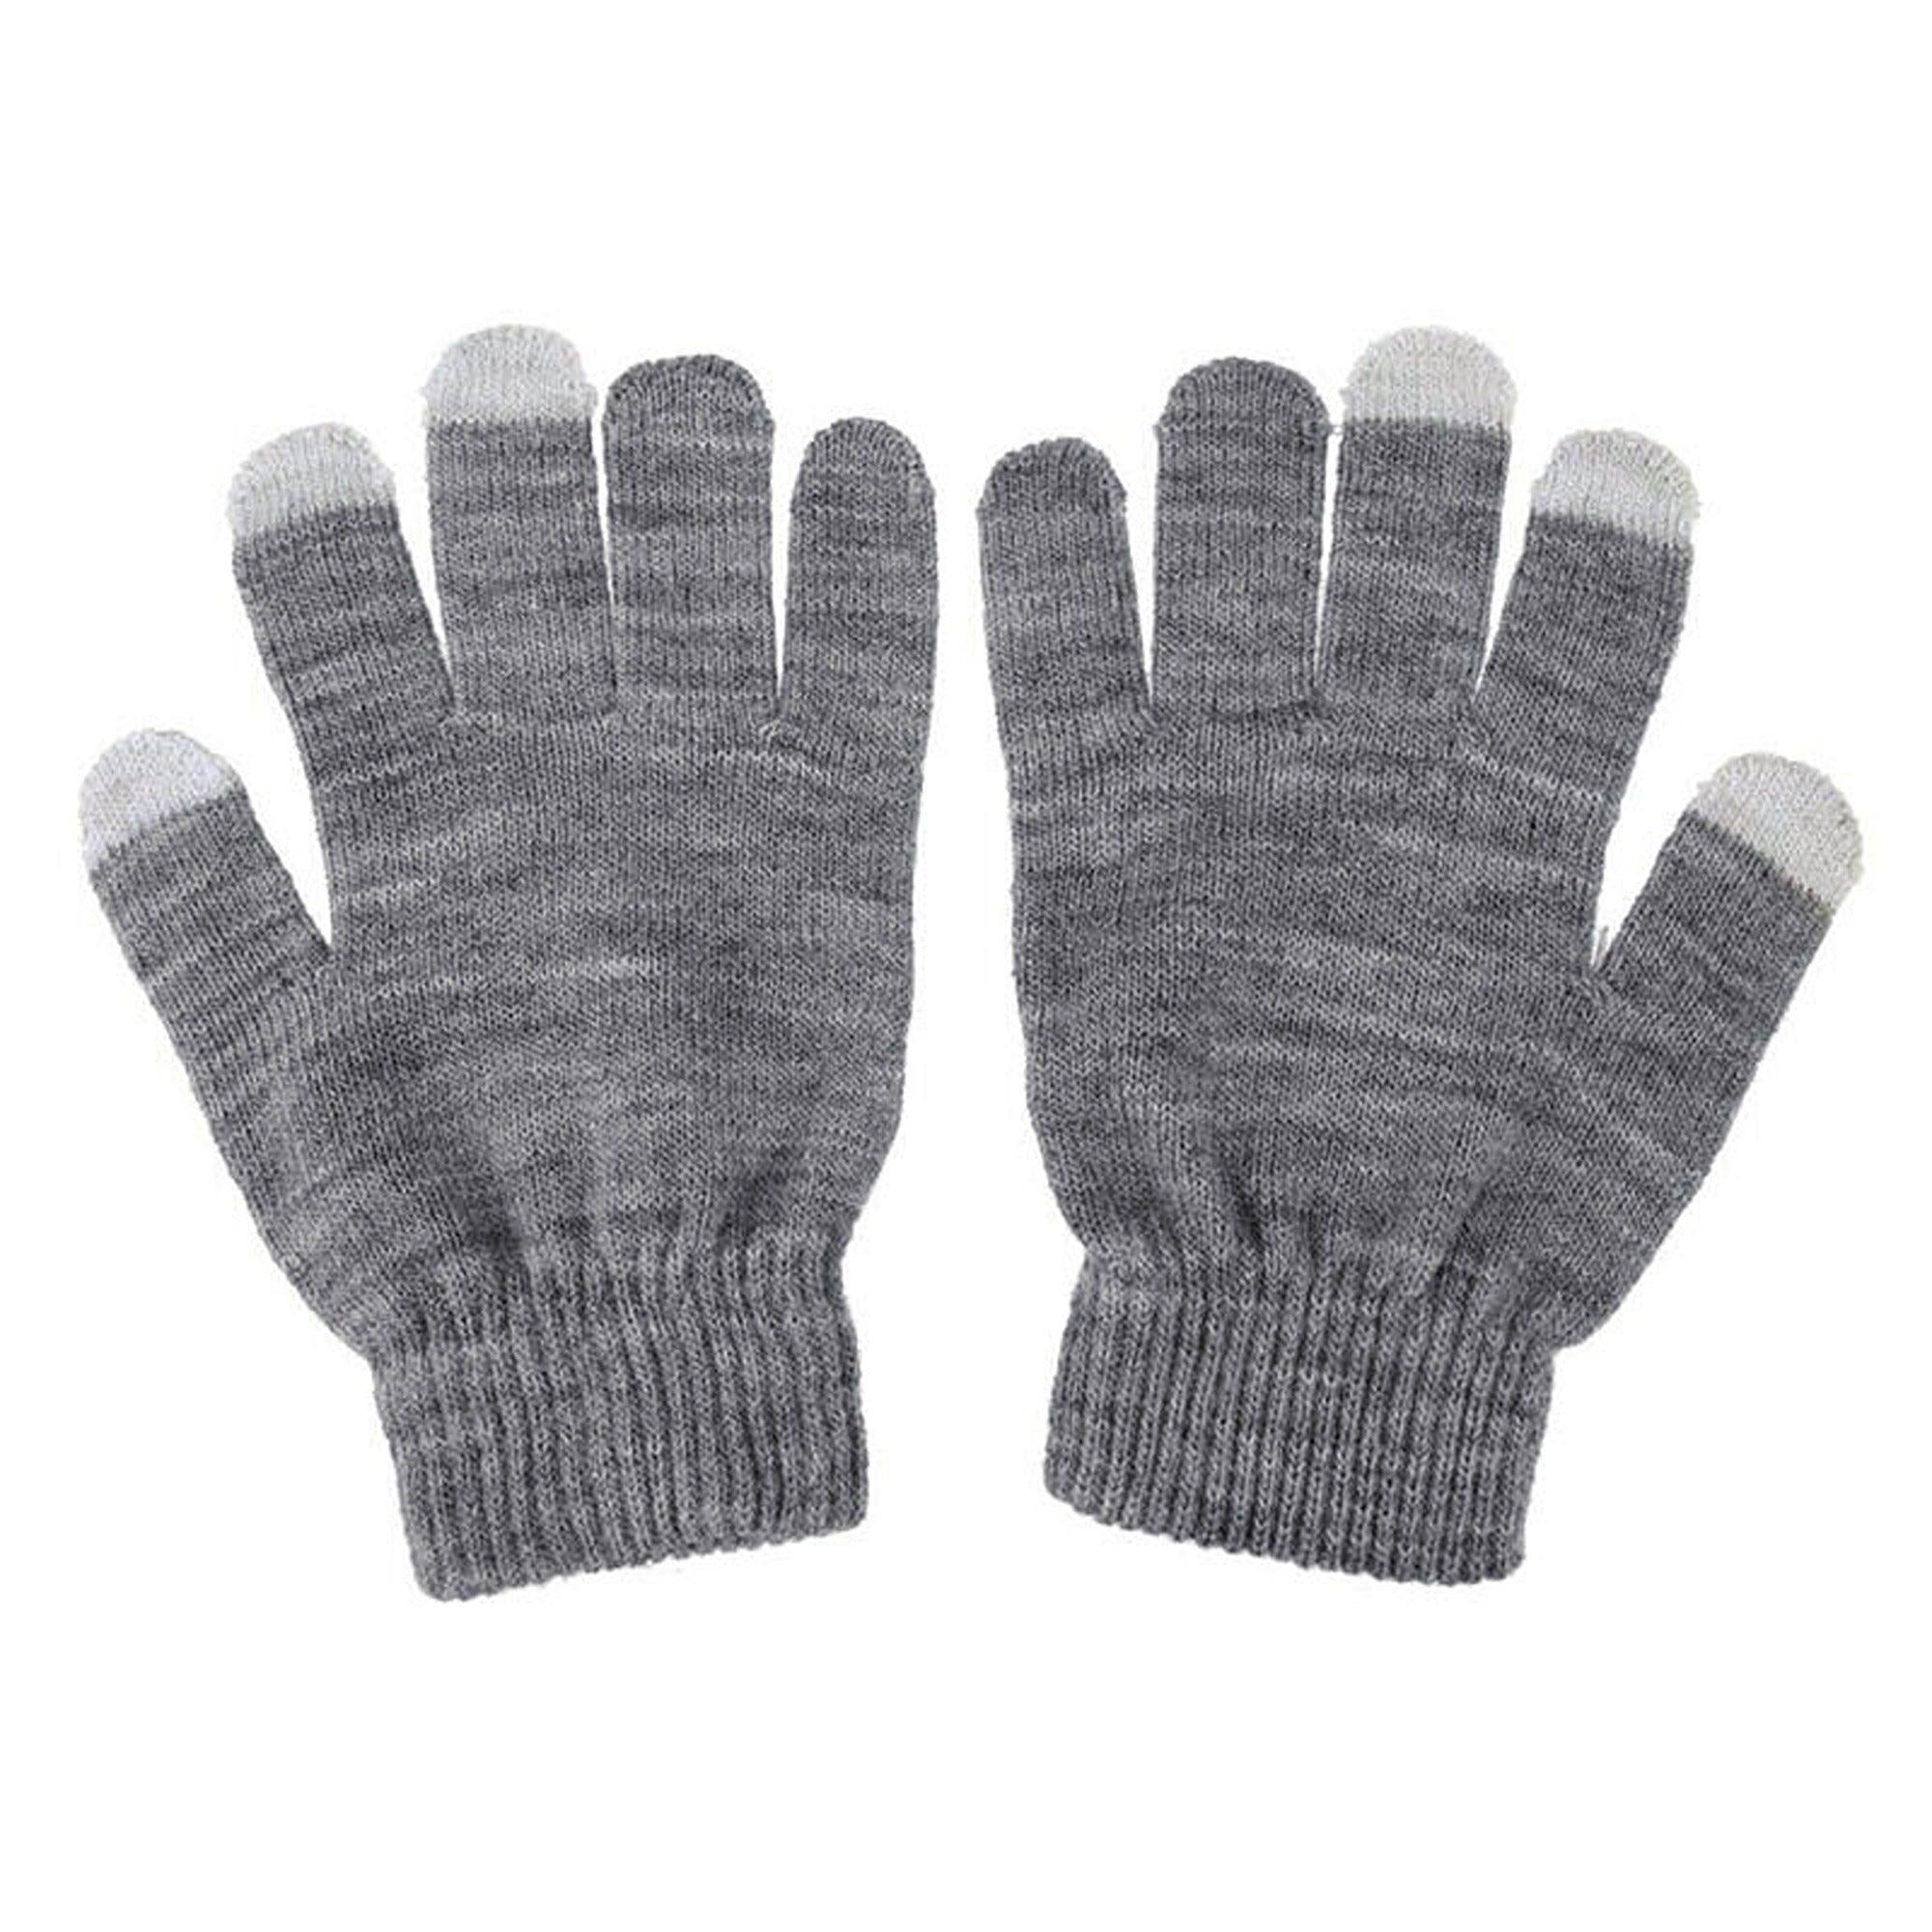 Women Men Winter Gloves Touch Screen Anti-Slip Thermal Warm Soft Knitted Gloves